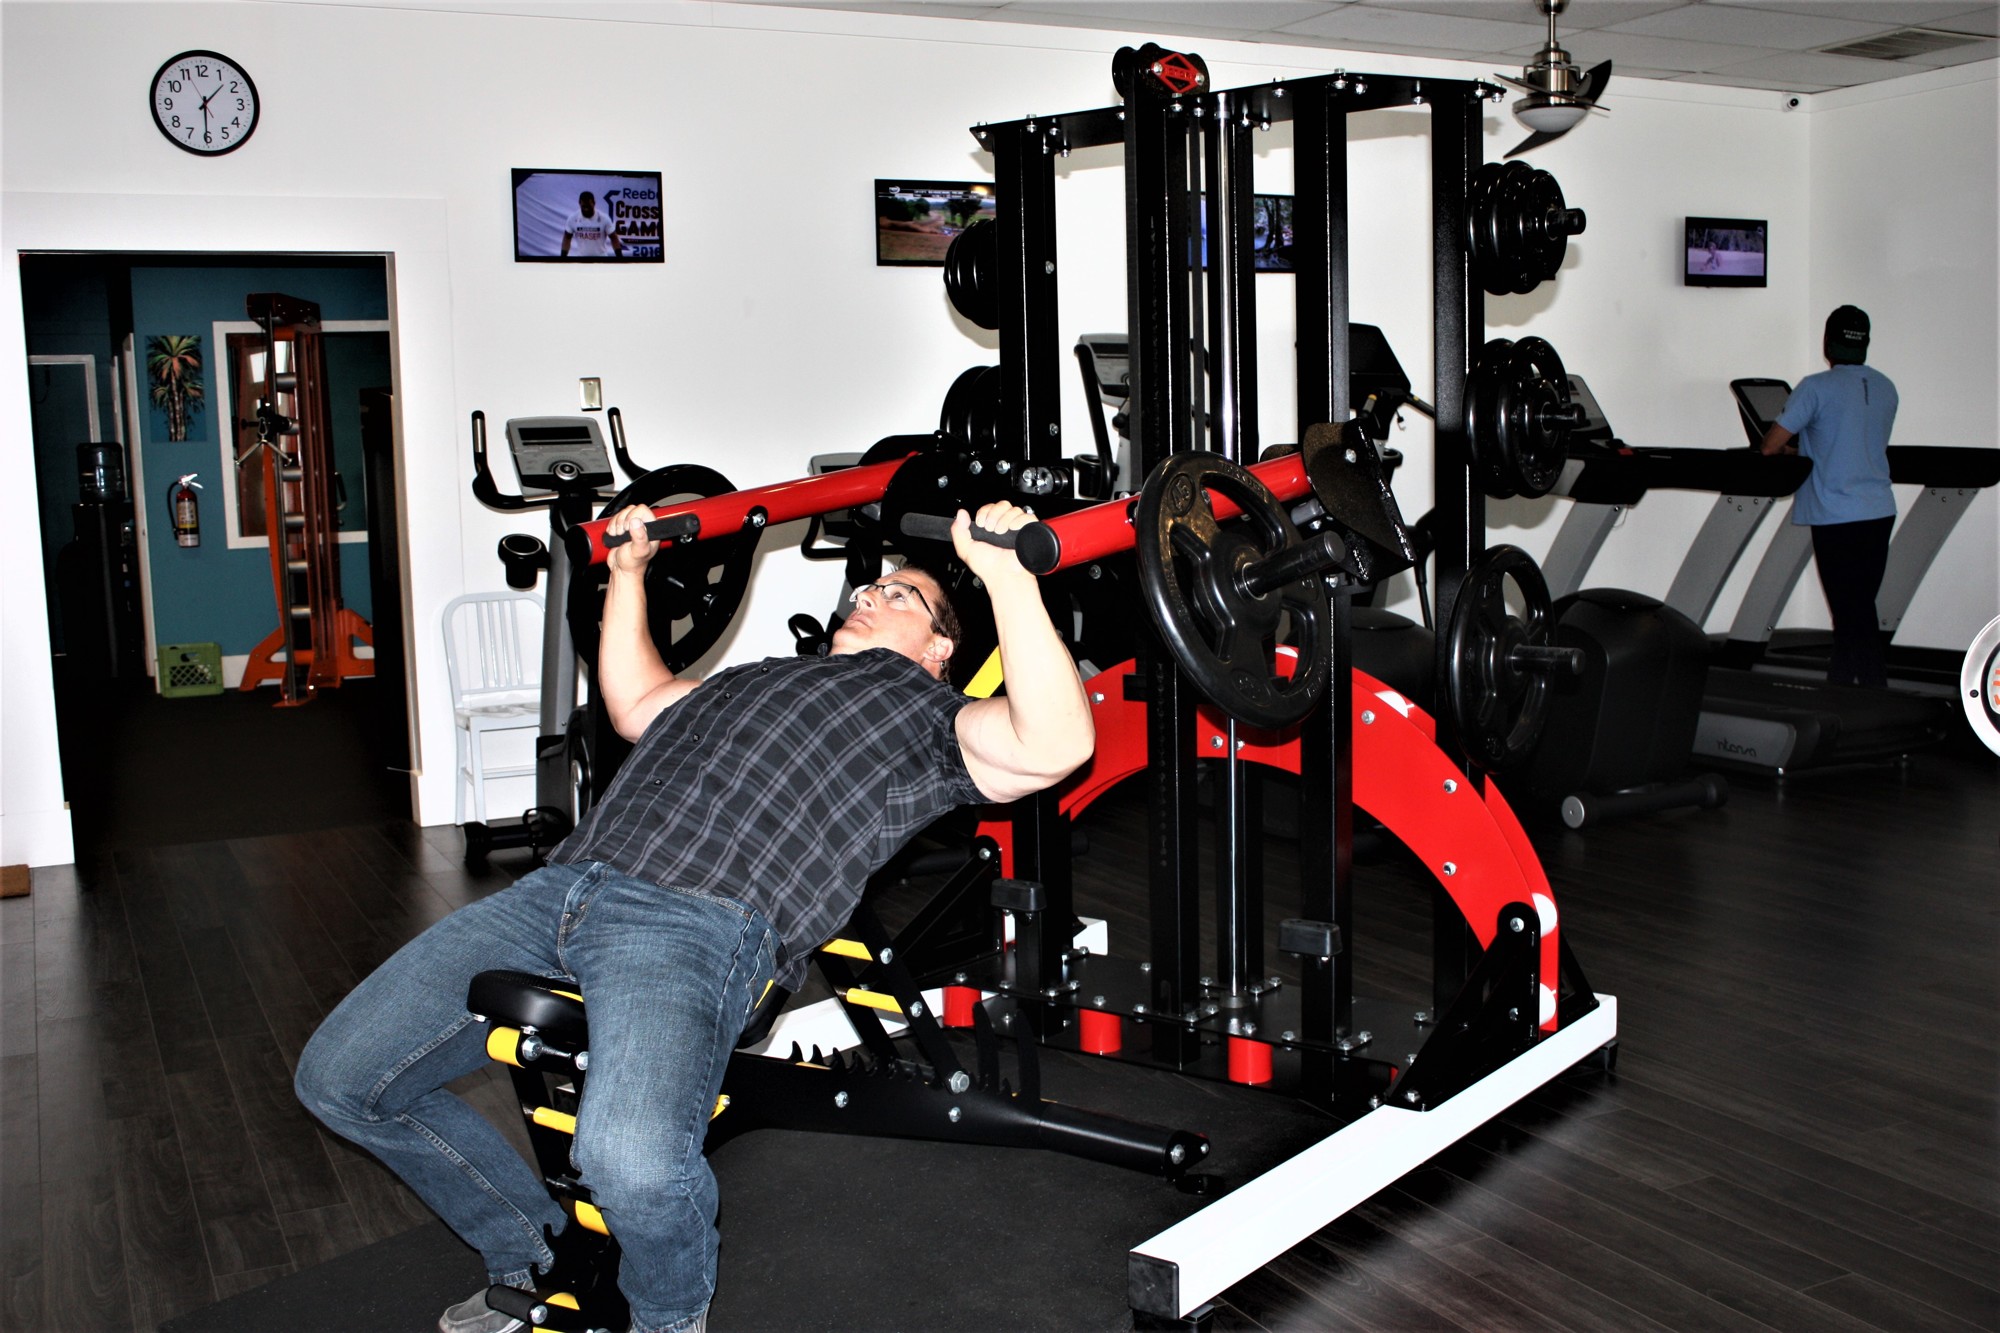 Cy Manula works out on his new machine, the Master Press. Photo by Wayne Grant